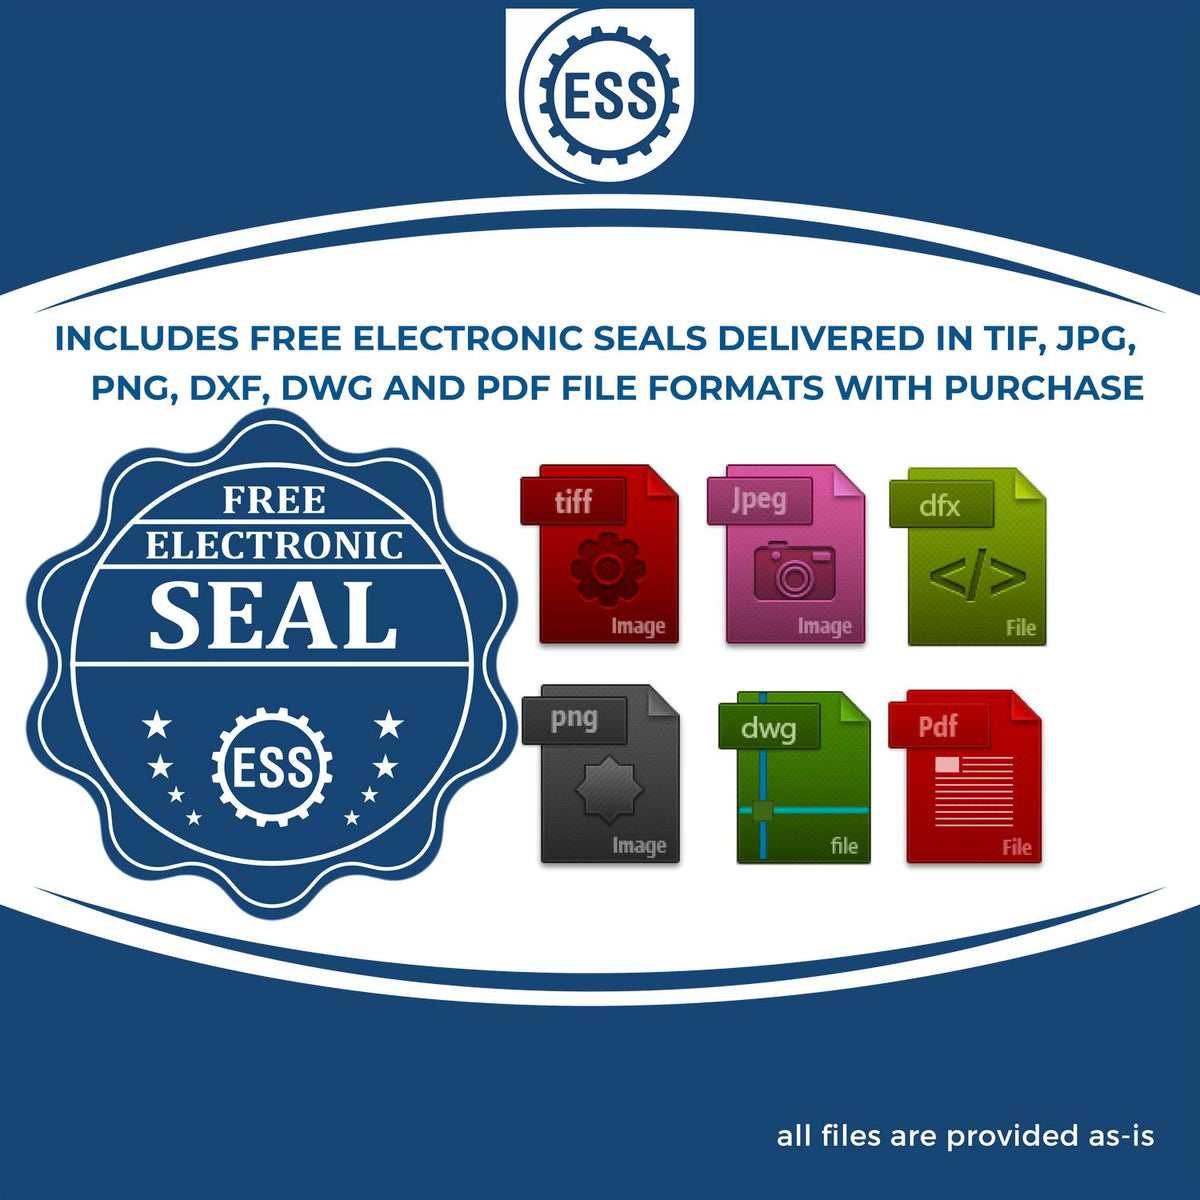 An infographic for the free electronic seal for the Self-Inking State Seal Arizona Notary Stamp illustrating the different file type icons such as DXF, DWG, TIF, JPG and PNG.